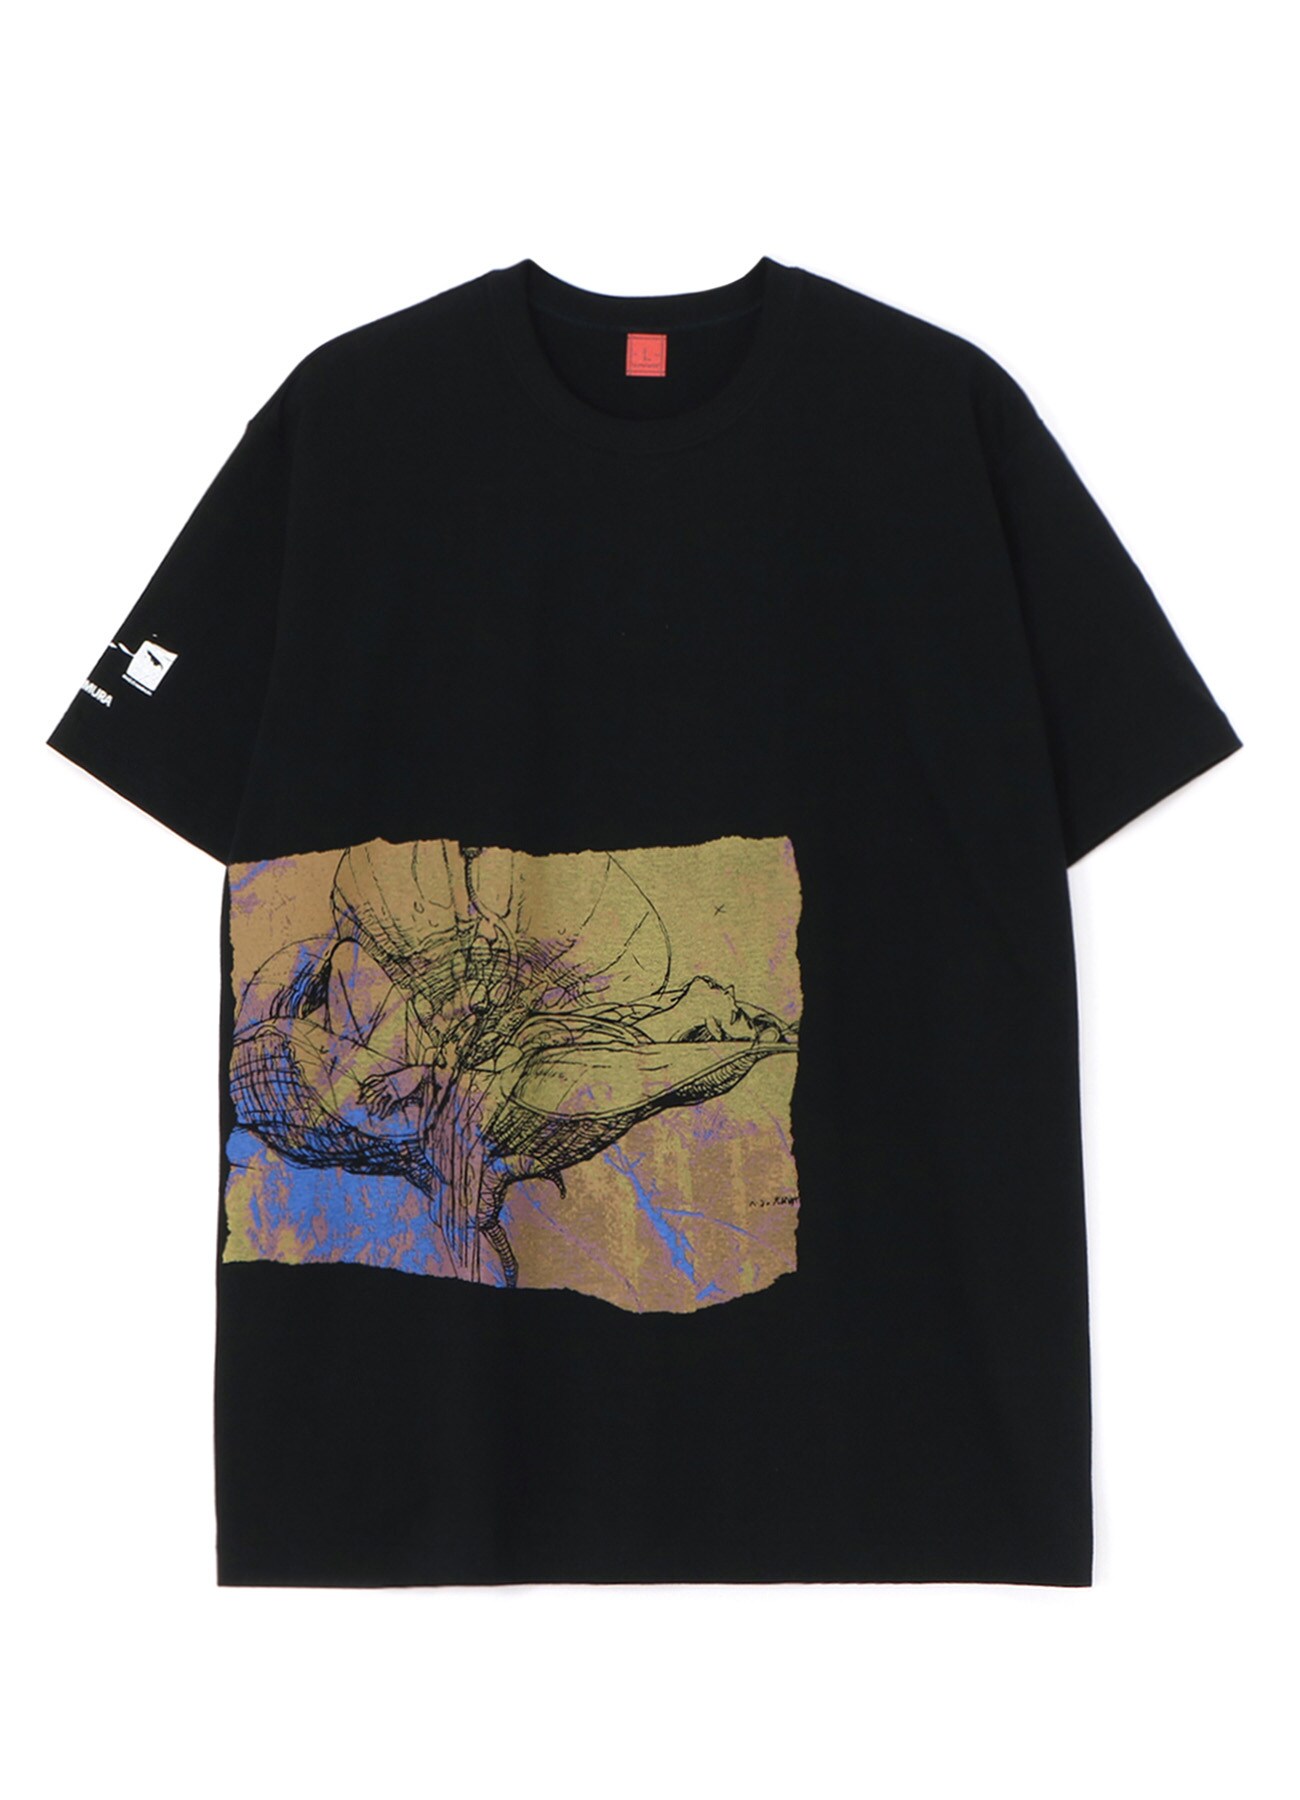 S'YTE x KAZUO KAMIMURA-PICTURE OF A PHANTOM- COTTON JERSEY T-SHIRT 